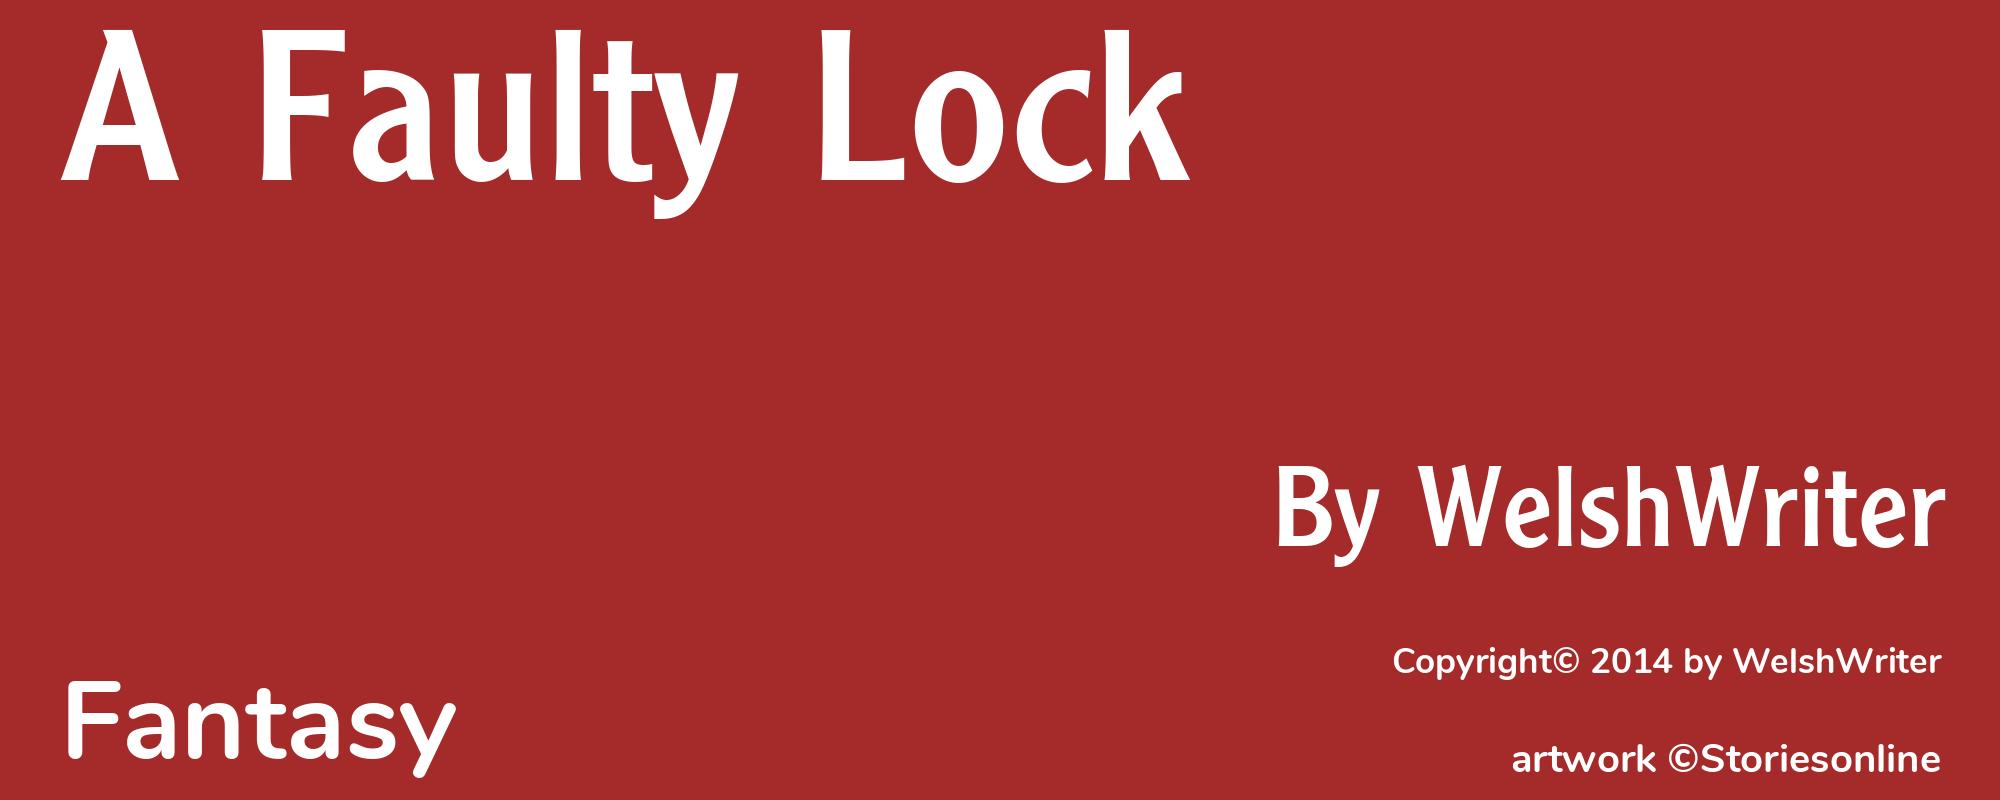 A Faulty Lock - Cover